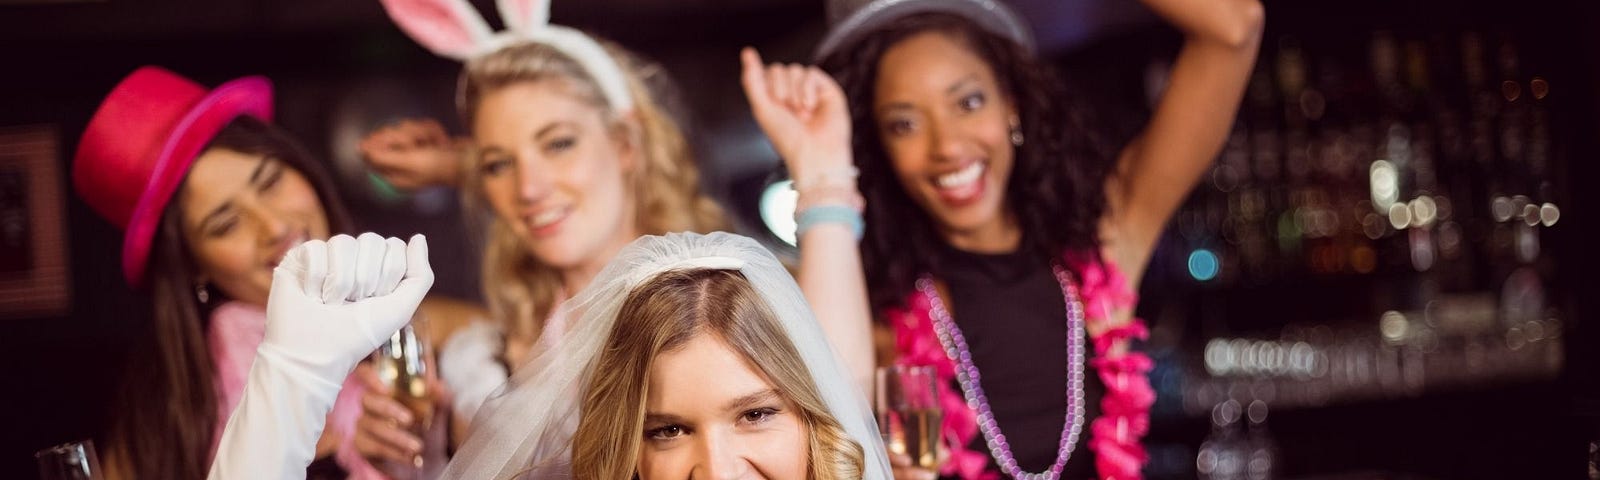 5 Weird Neurotypical Wedding Traditions — Bride and Her Friends Celebrating a Bachelorette Party